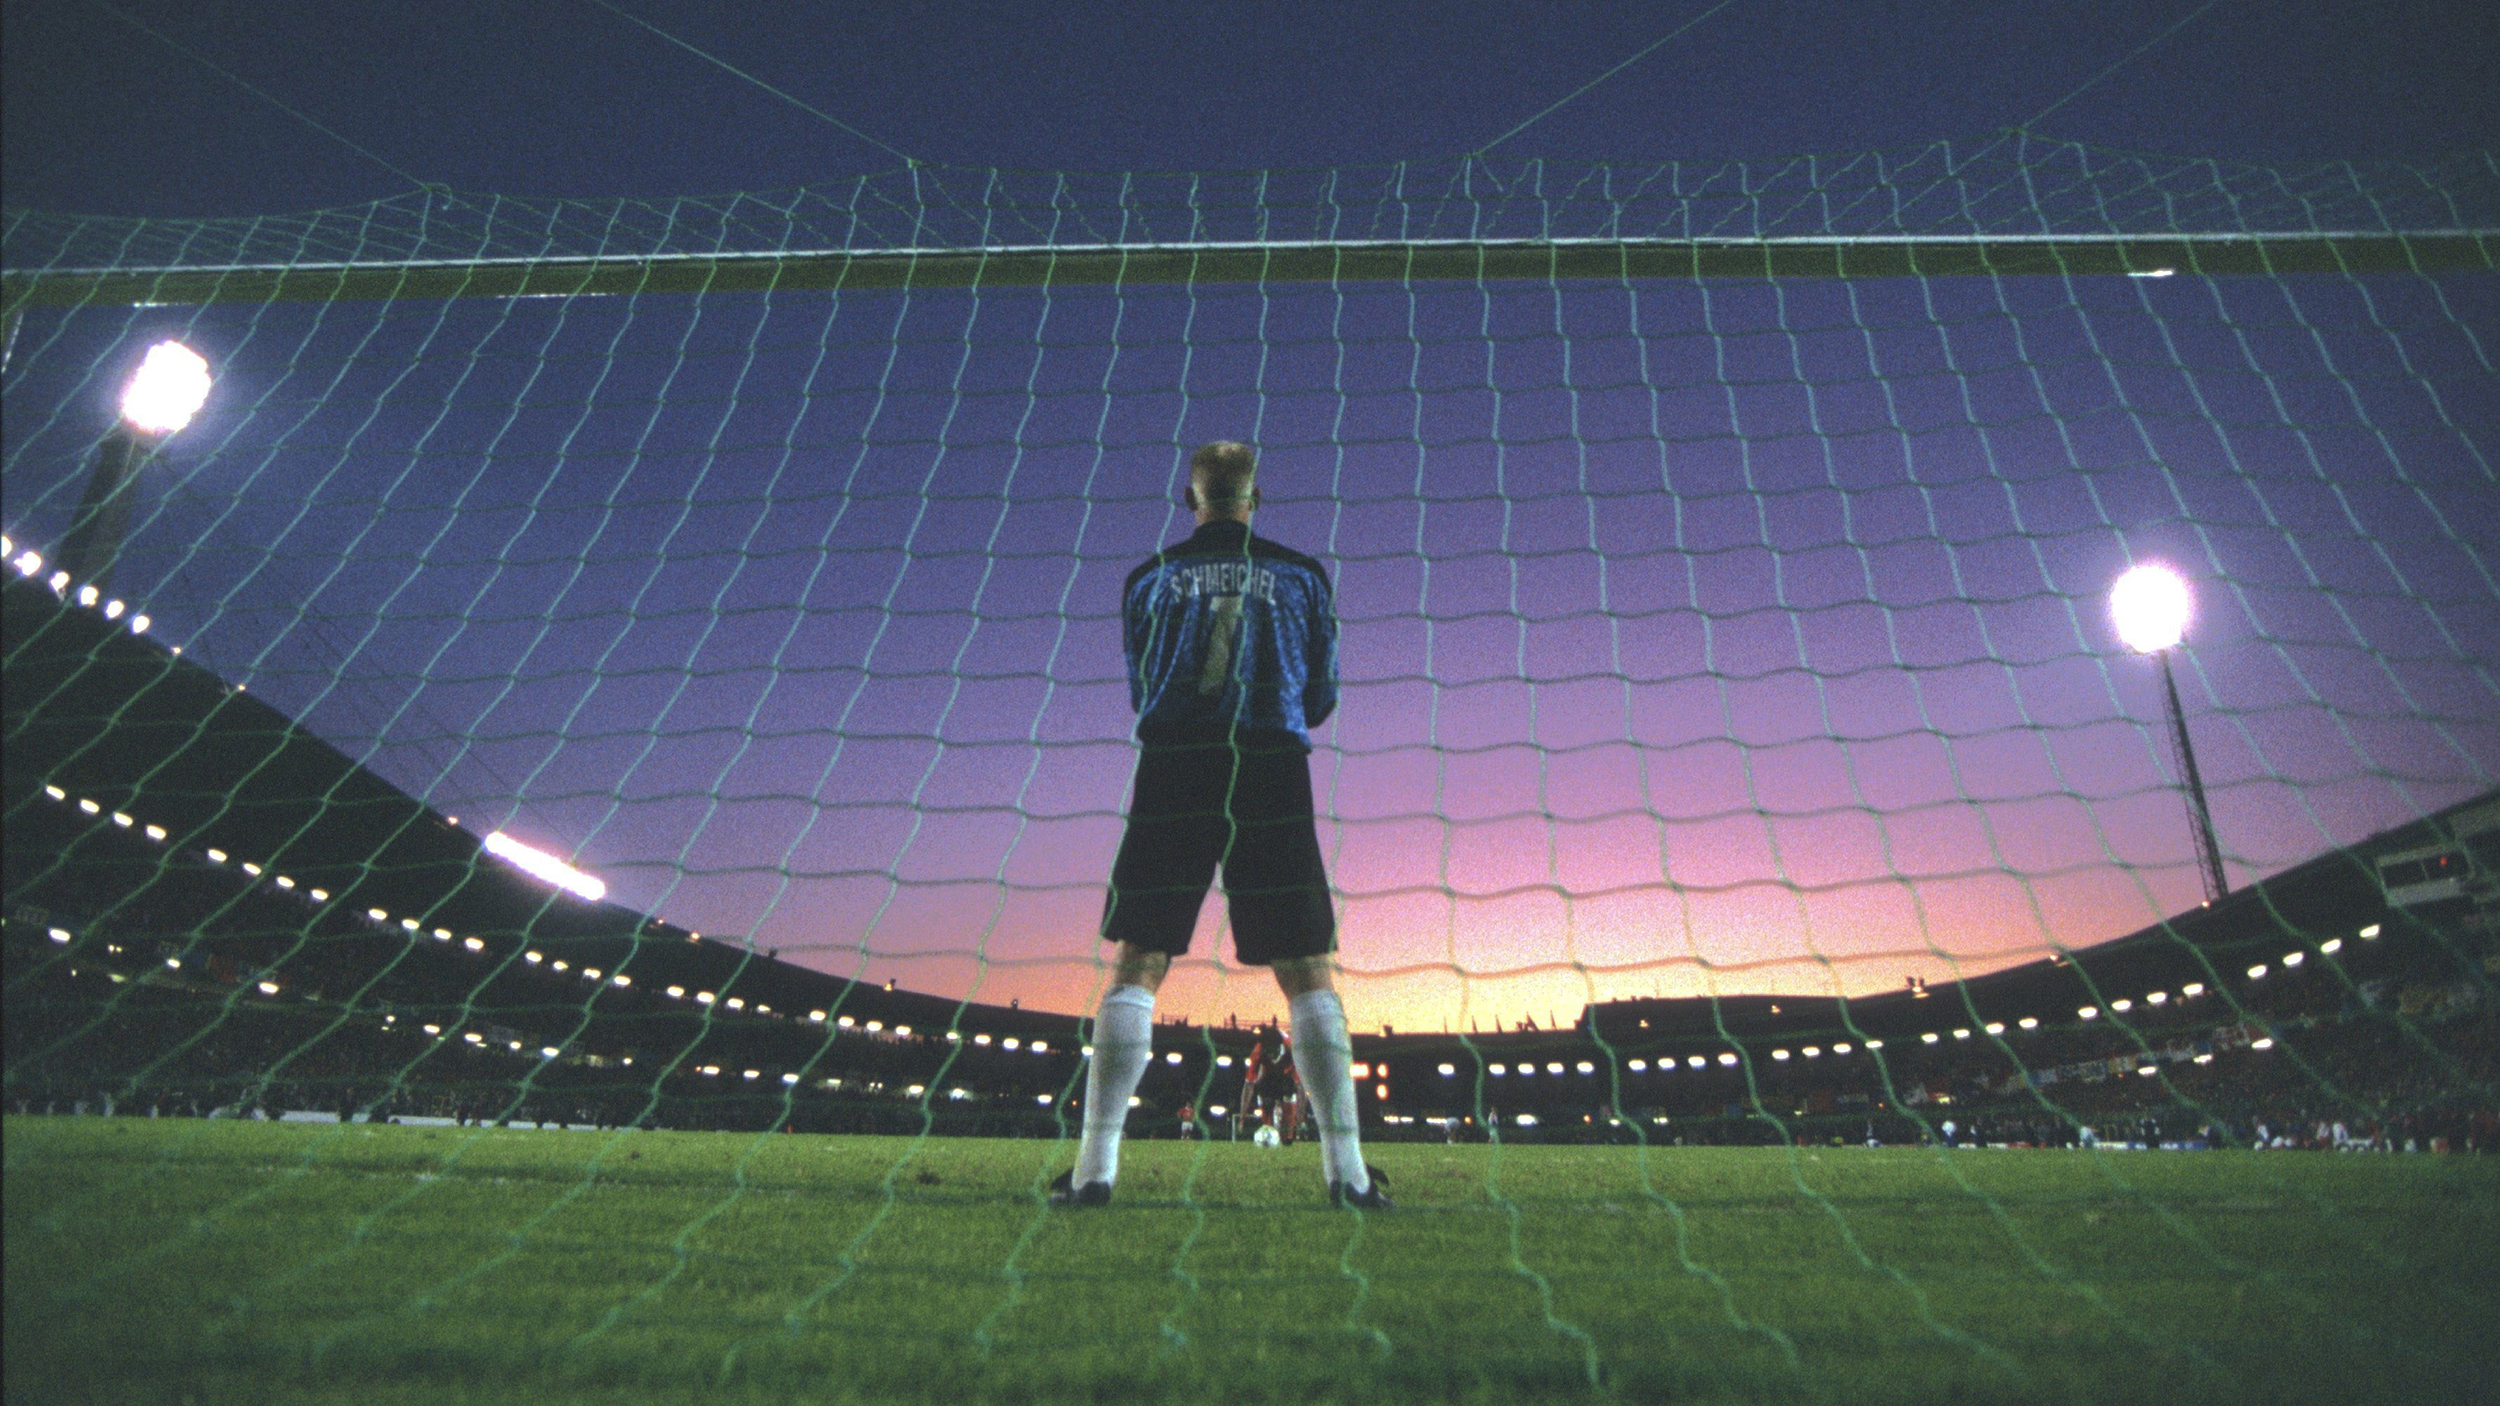 A soccer goalie displaying action and focus standing in front of a net.